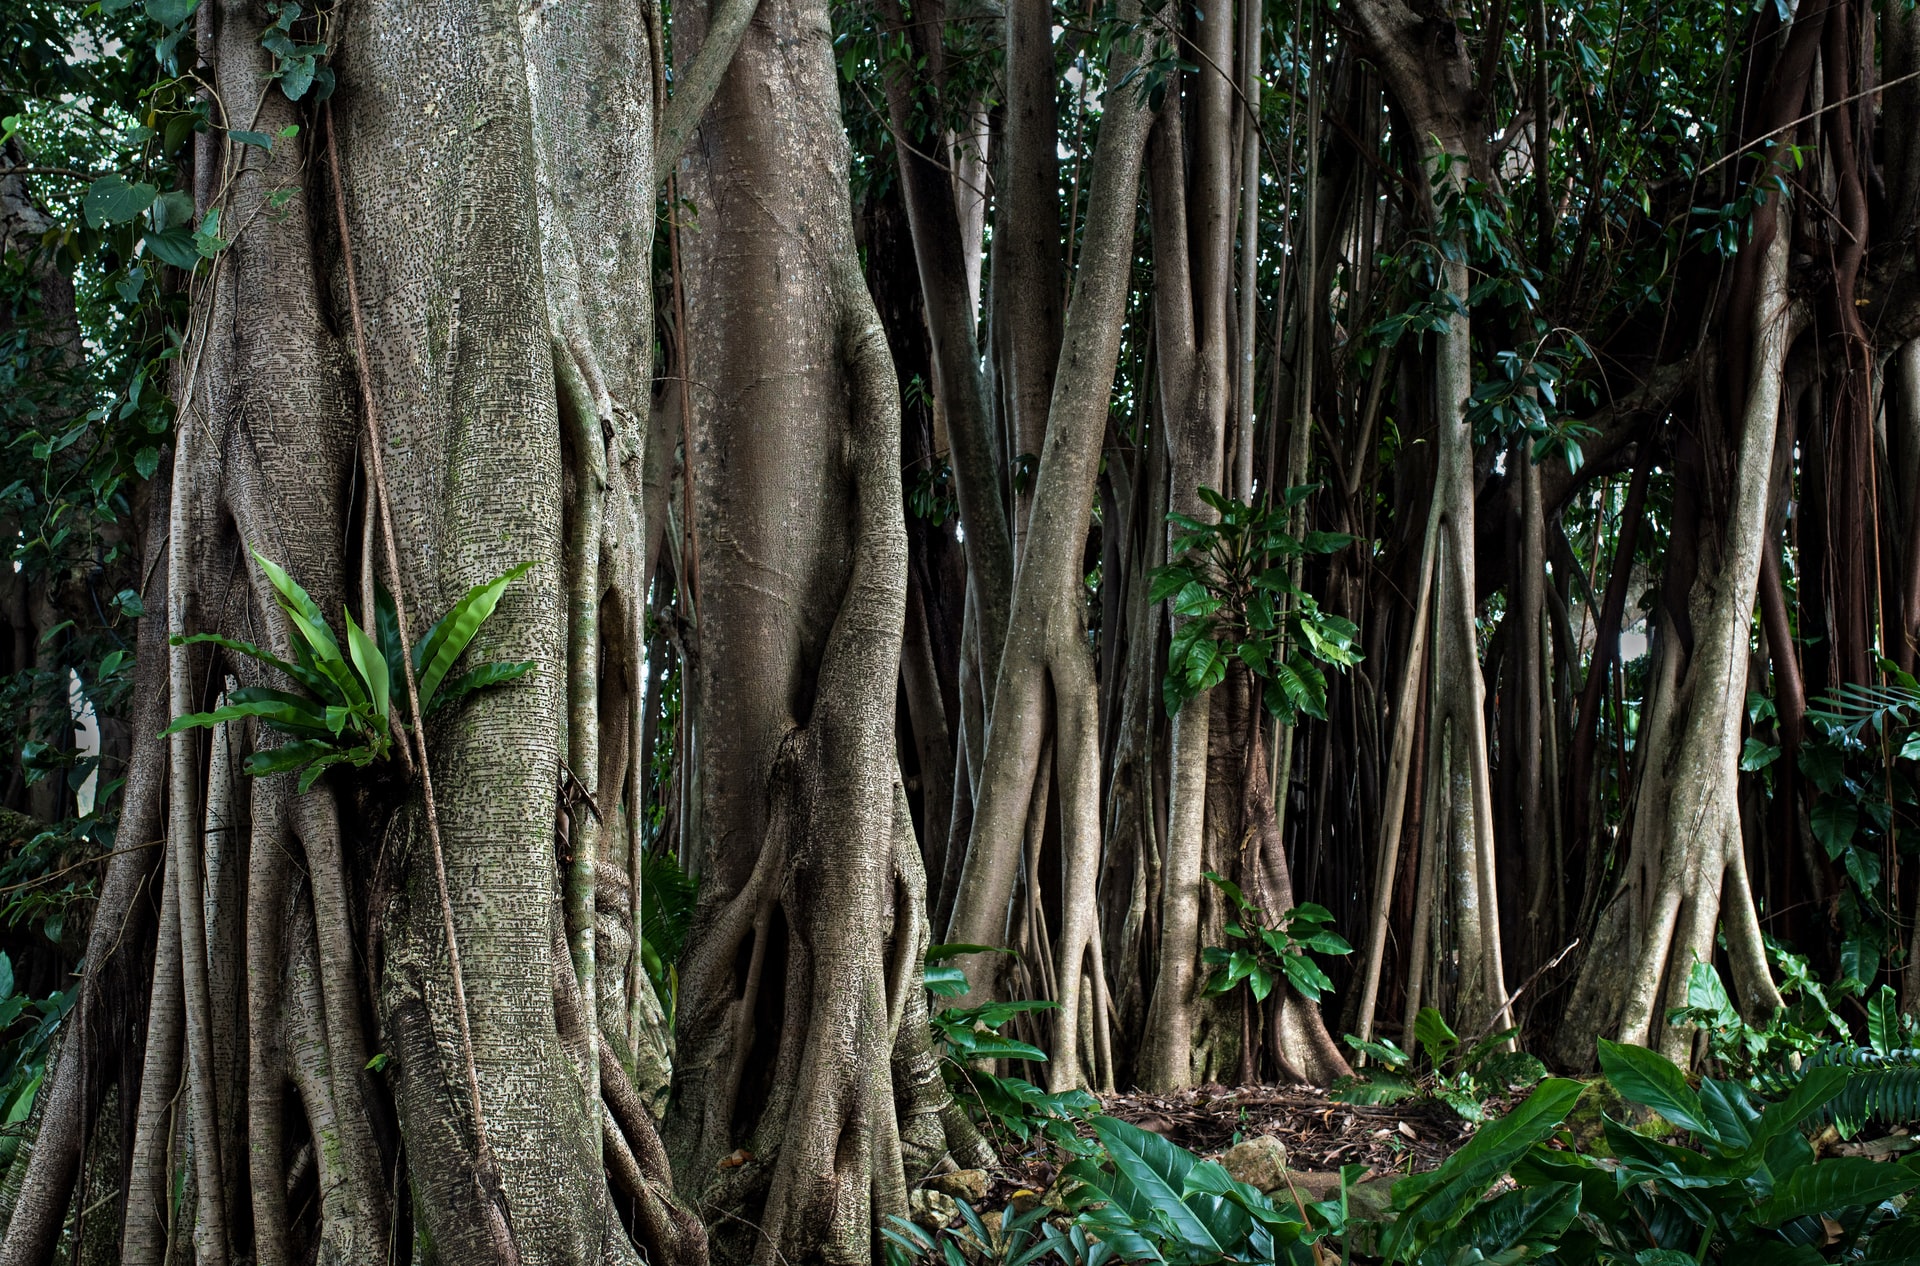 Rubber trees in Cairns, Australia